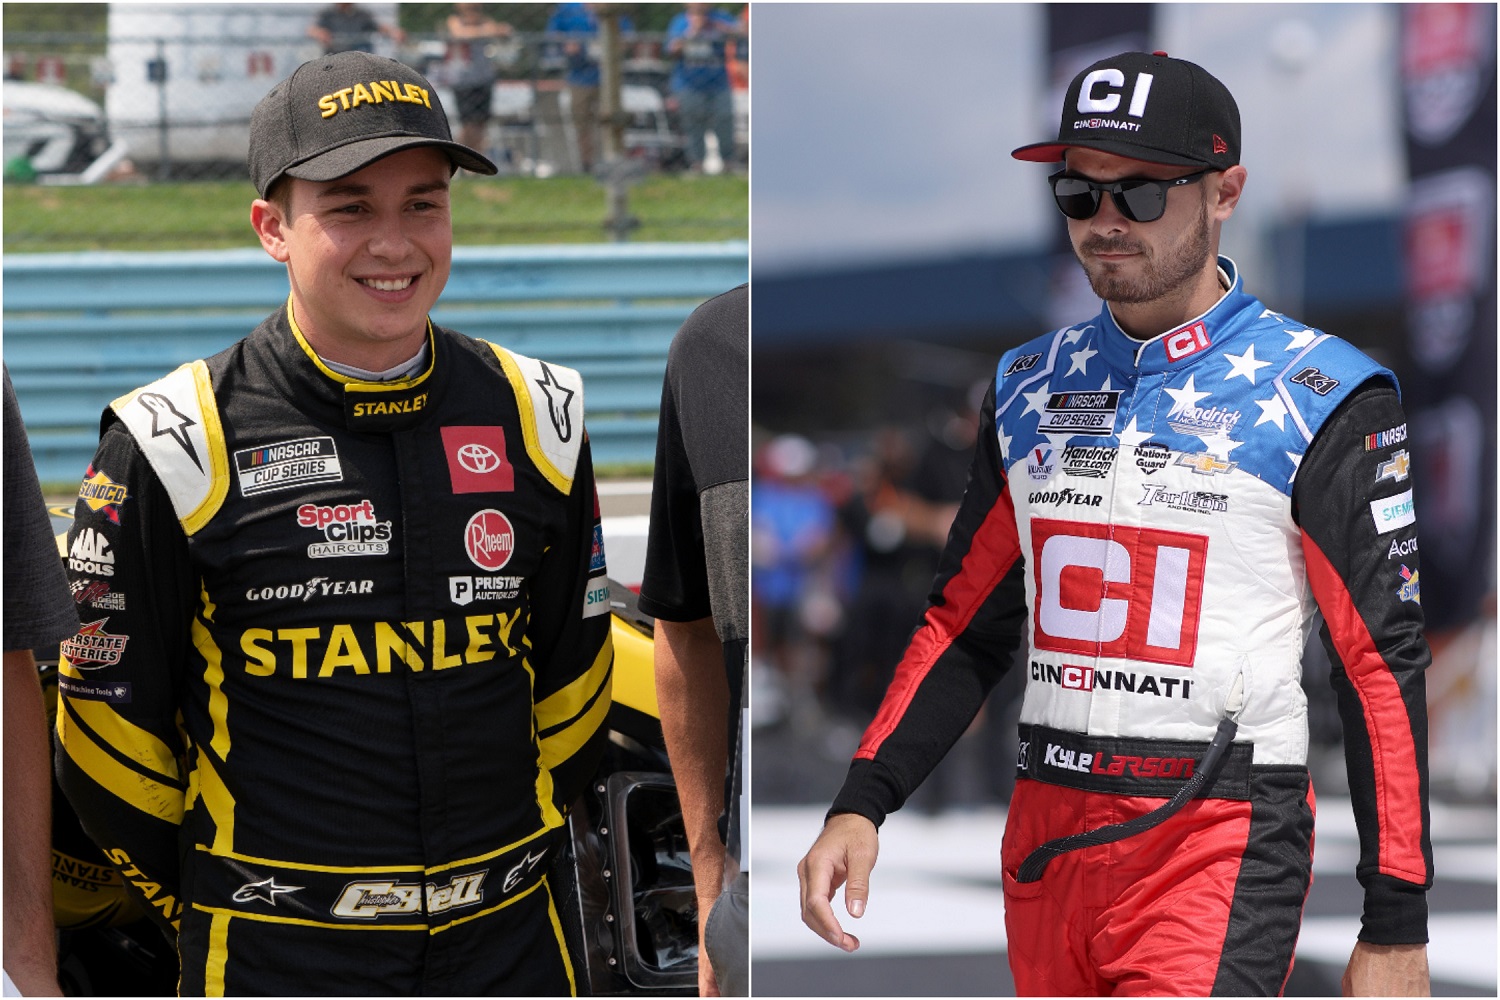 Christopher Bell and Kyle Larson drive in the NASCAR Cup Series for Joe Gibbs Racing and Hendrick Motorsports, respectively. | Getty Images